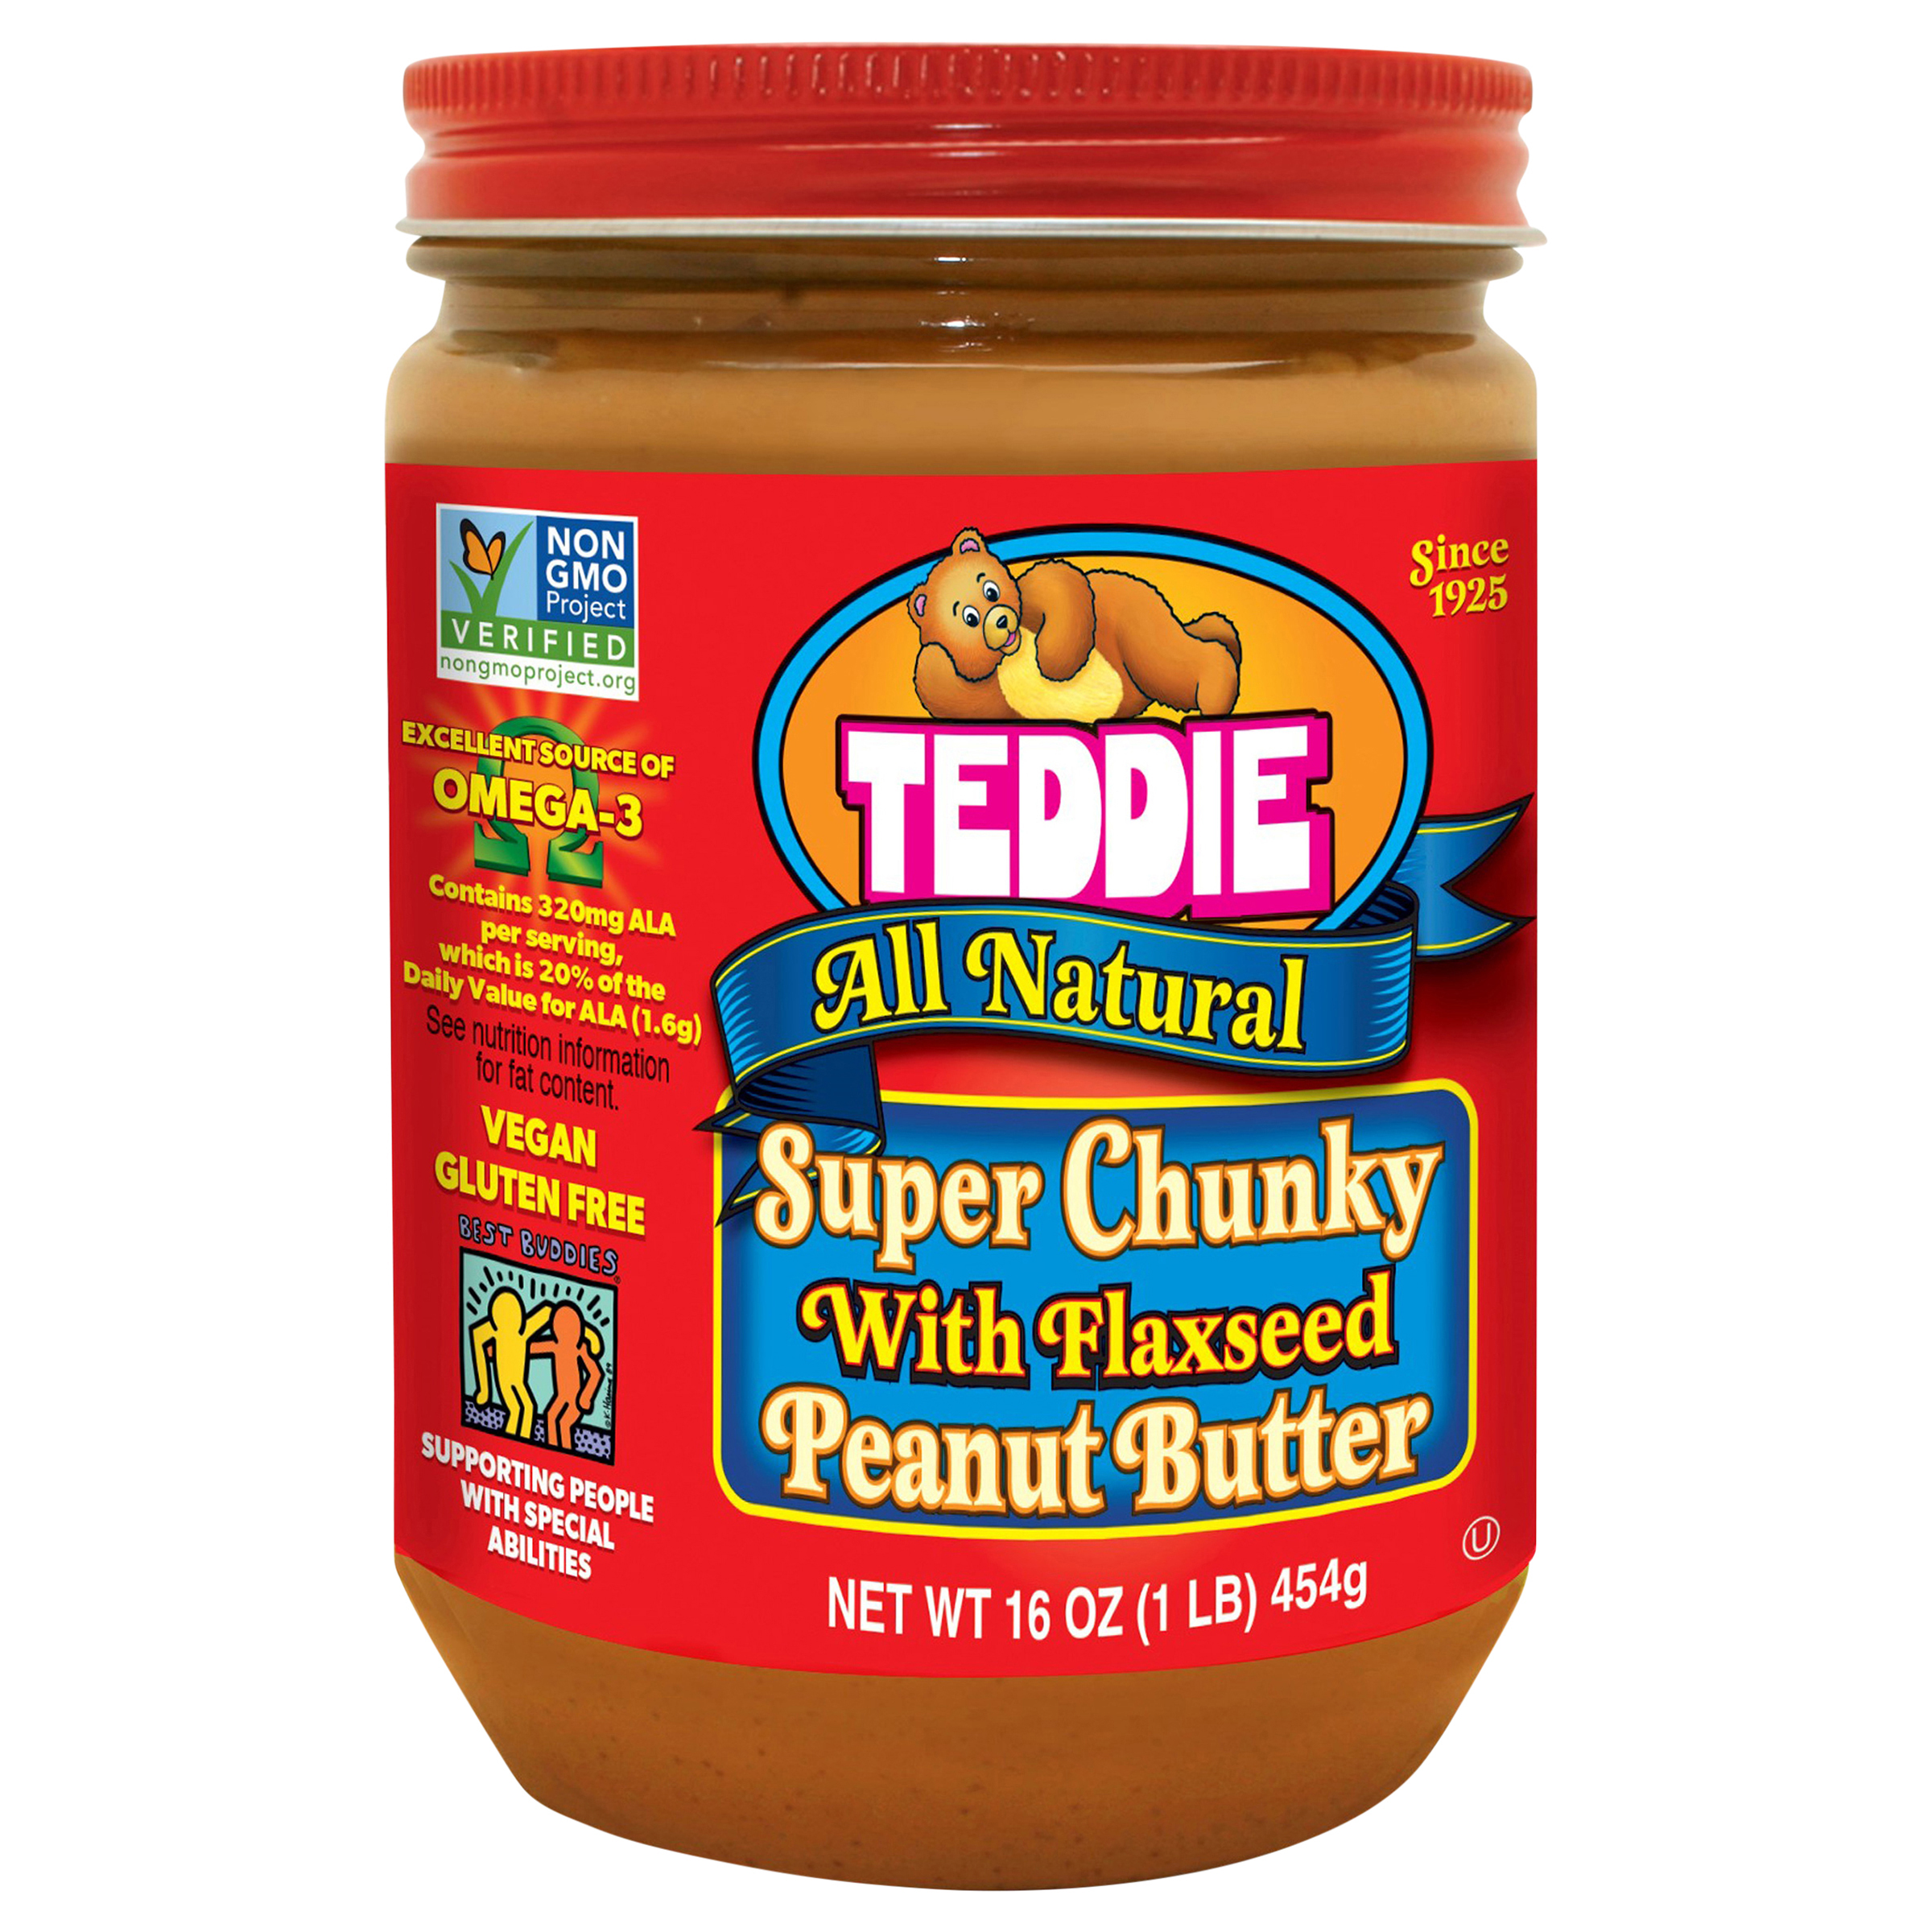 Peanut Butter, with Flaxseed, Super Chunky